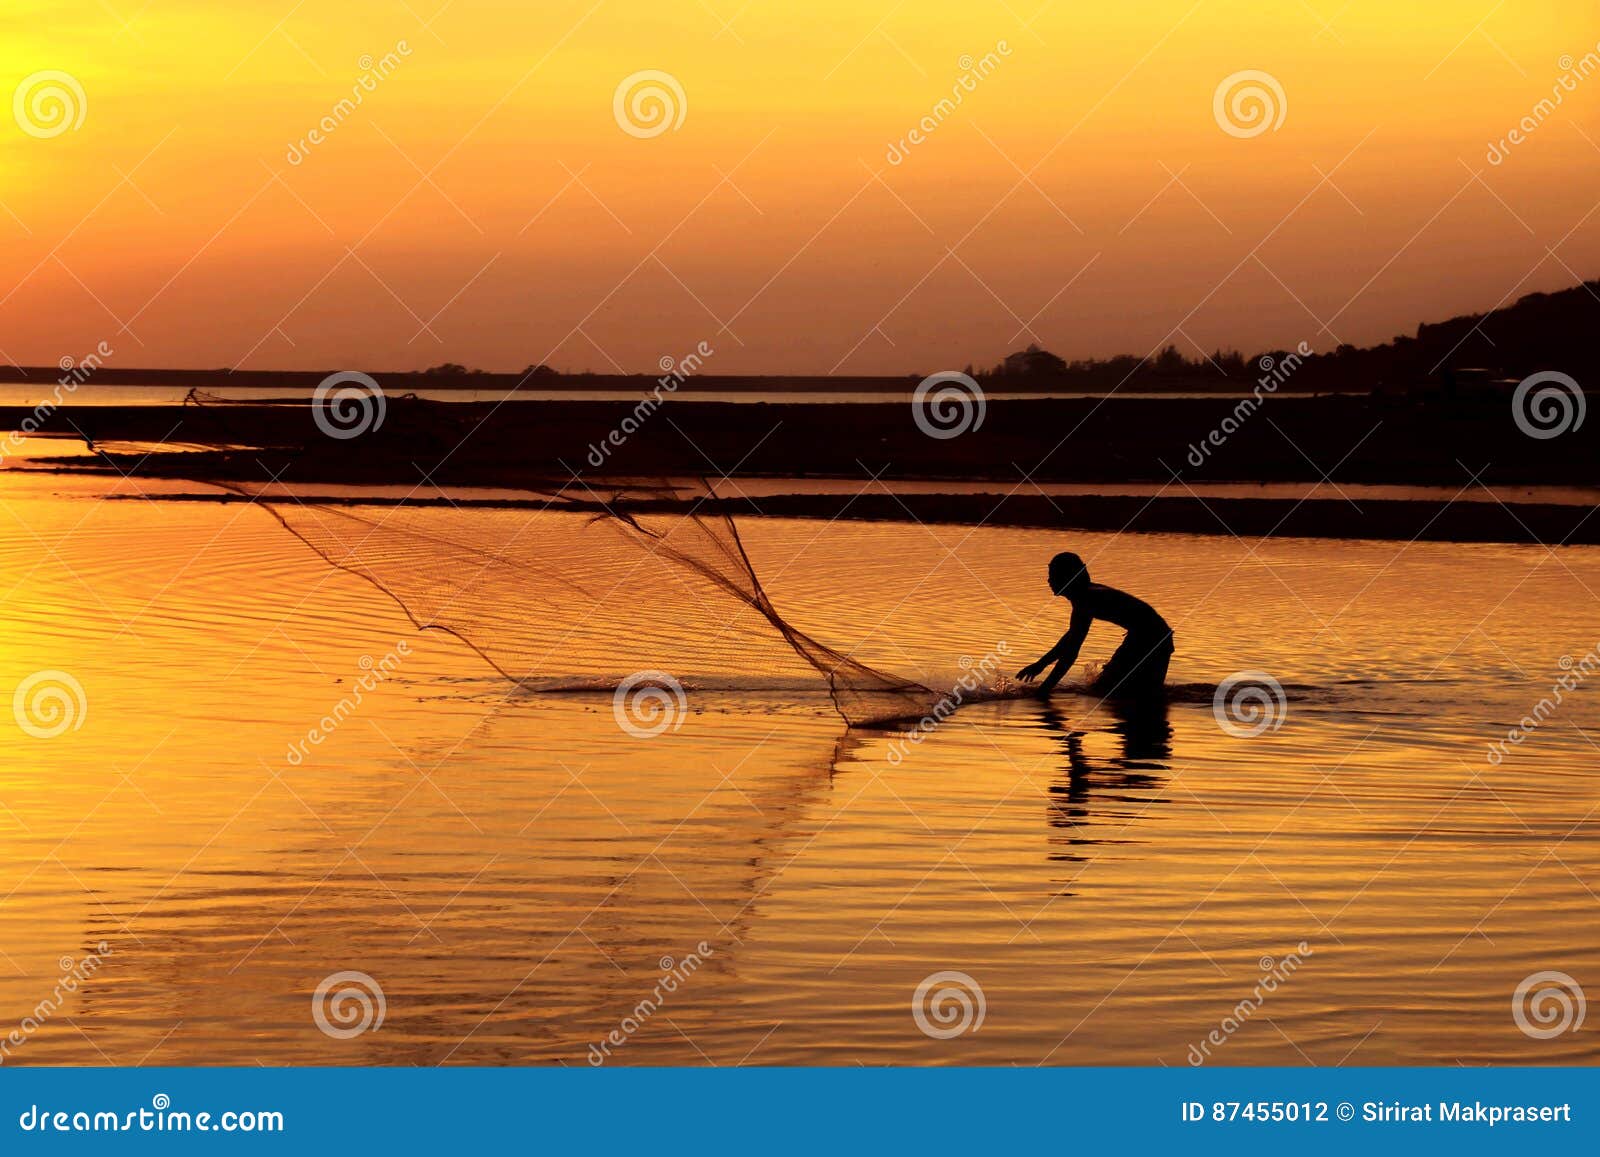 Asia Fishermen are Casting Nets for Fishing. Editorial Photography